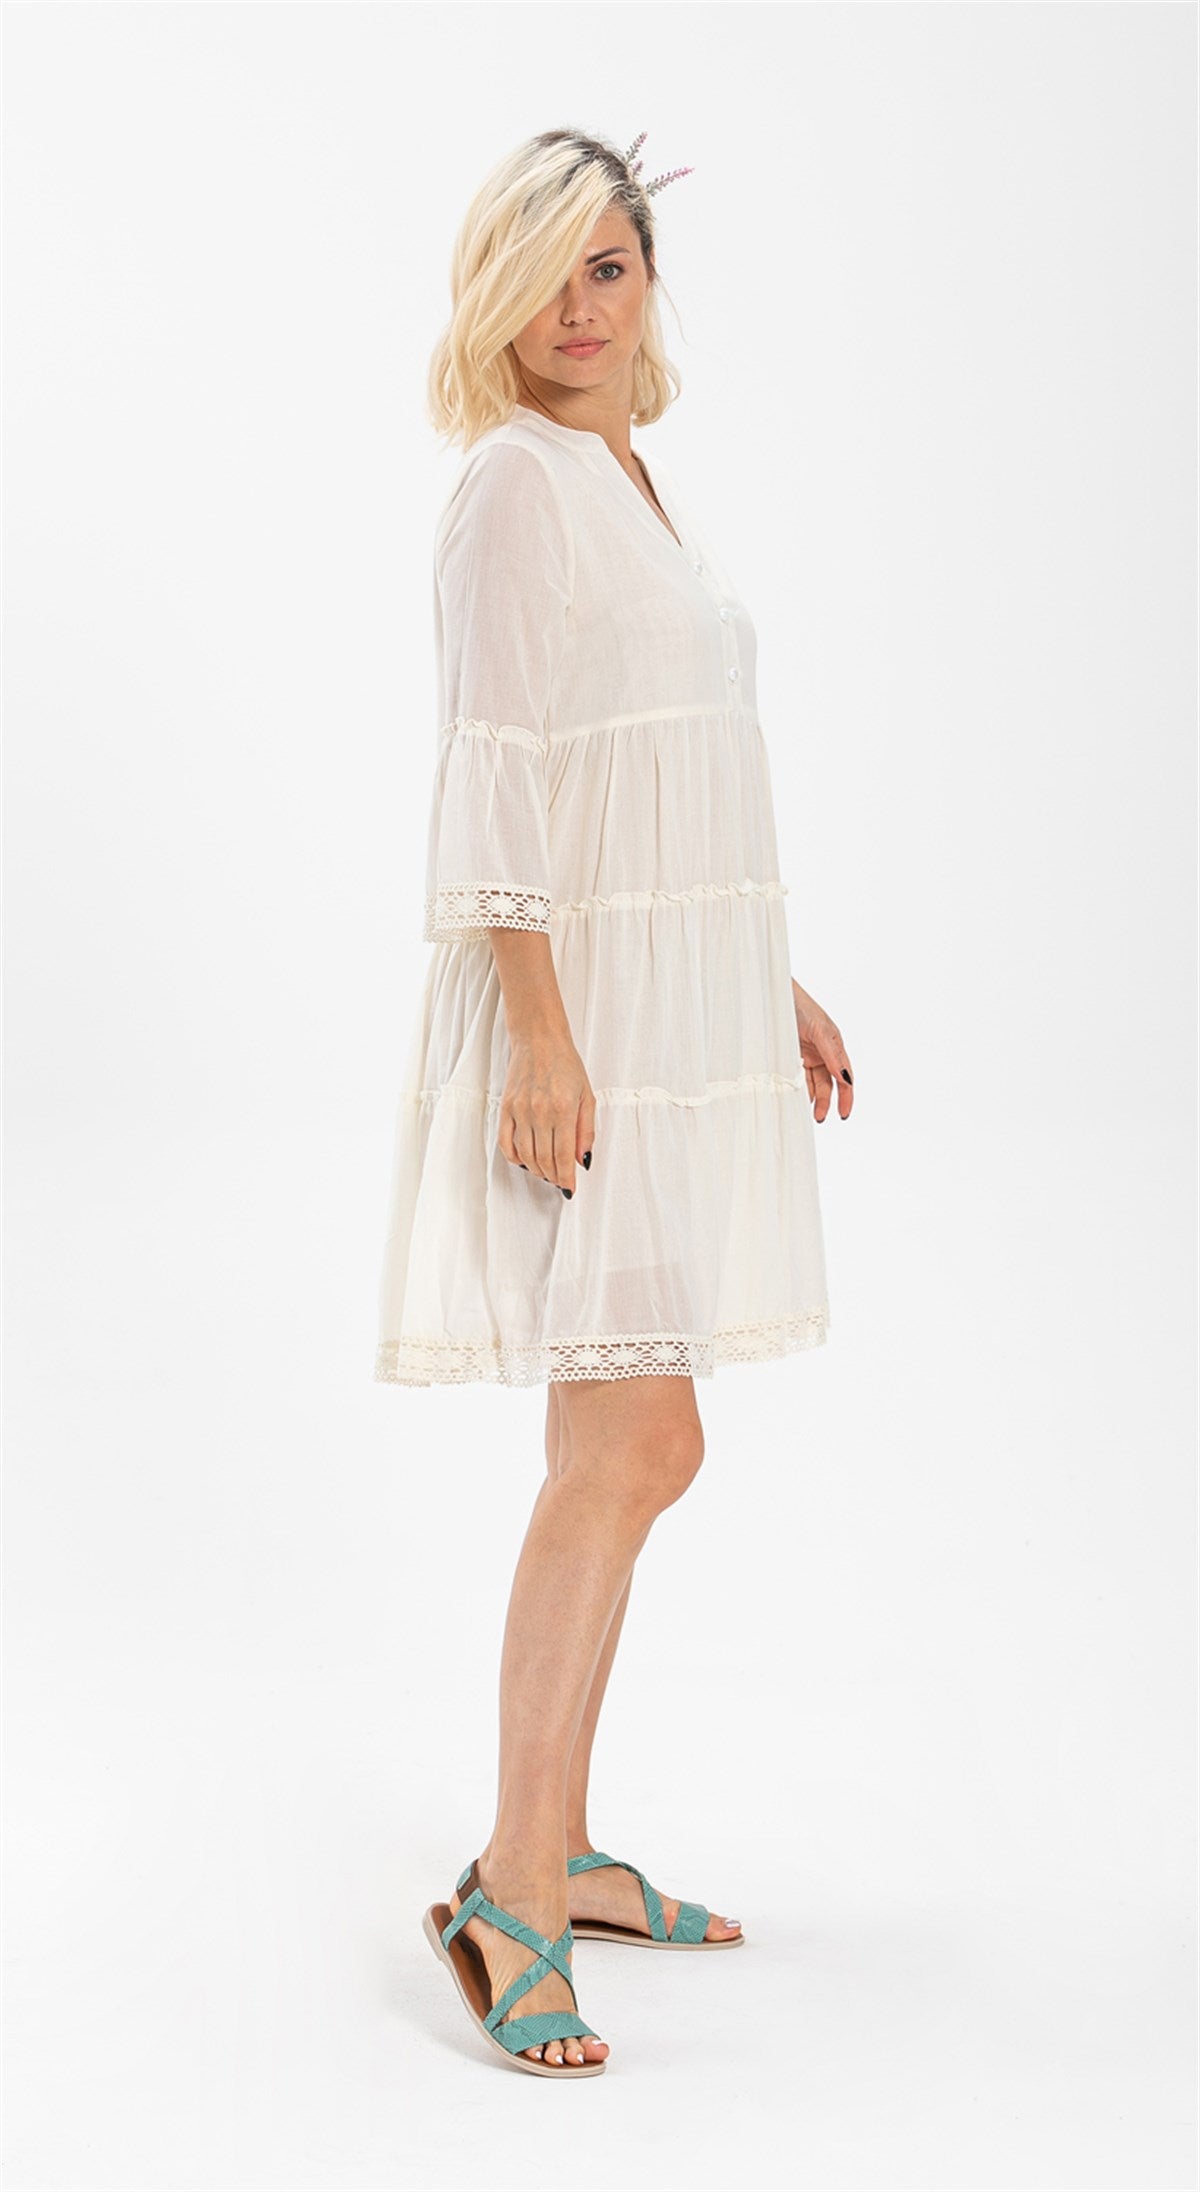 Trojan Sleeve Voile Dress with Guipure Lace Details